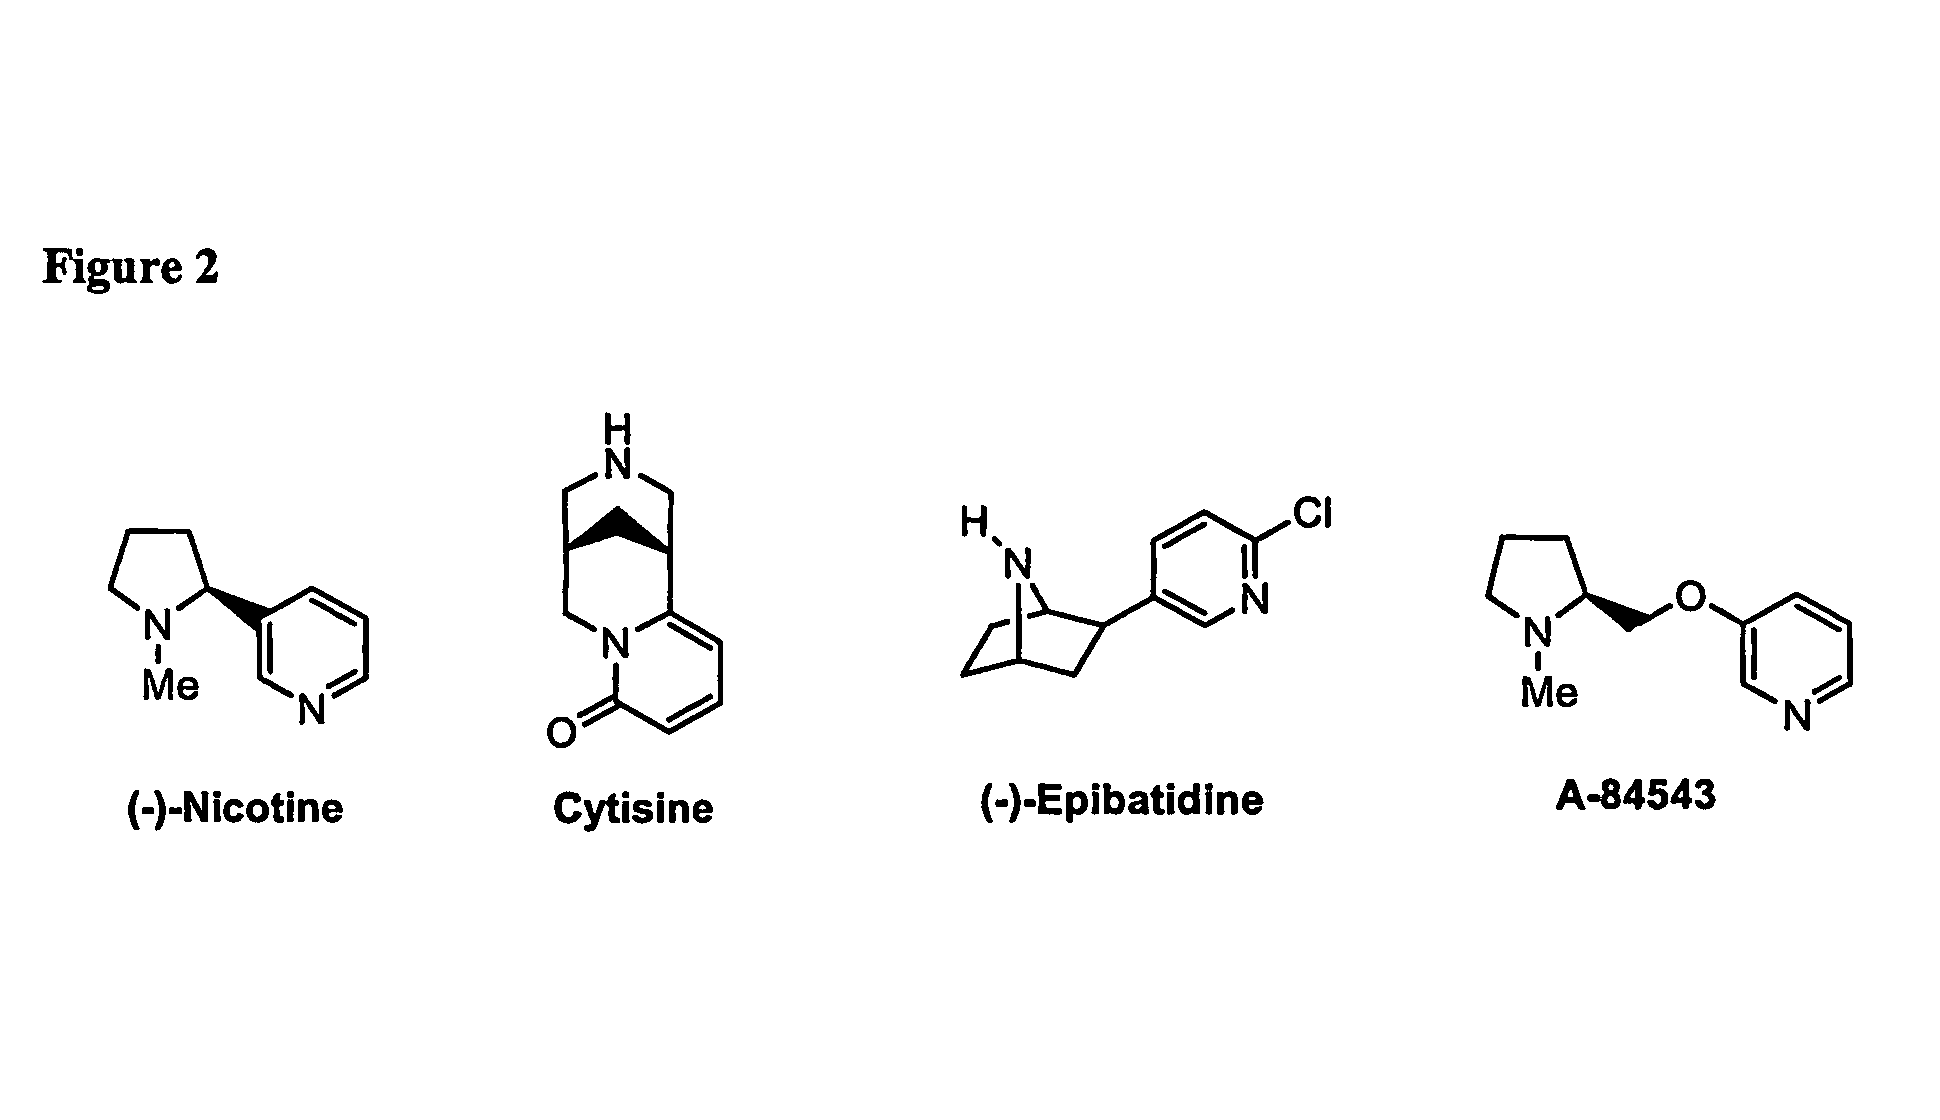 Ligands for Nicotinic Acetylcholine Receptors, and Methods of Making and Using Them